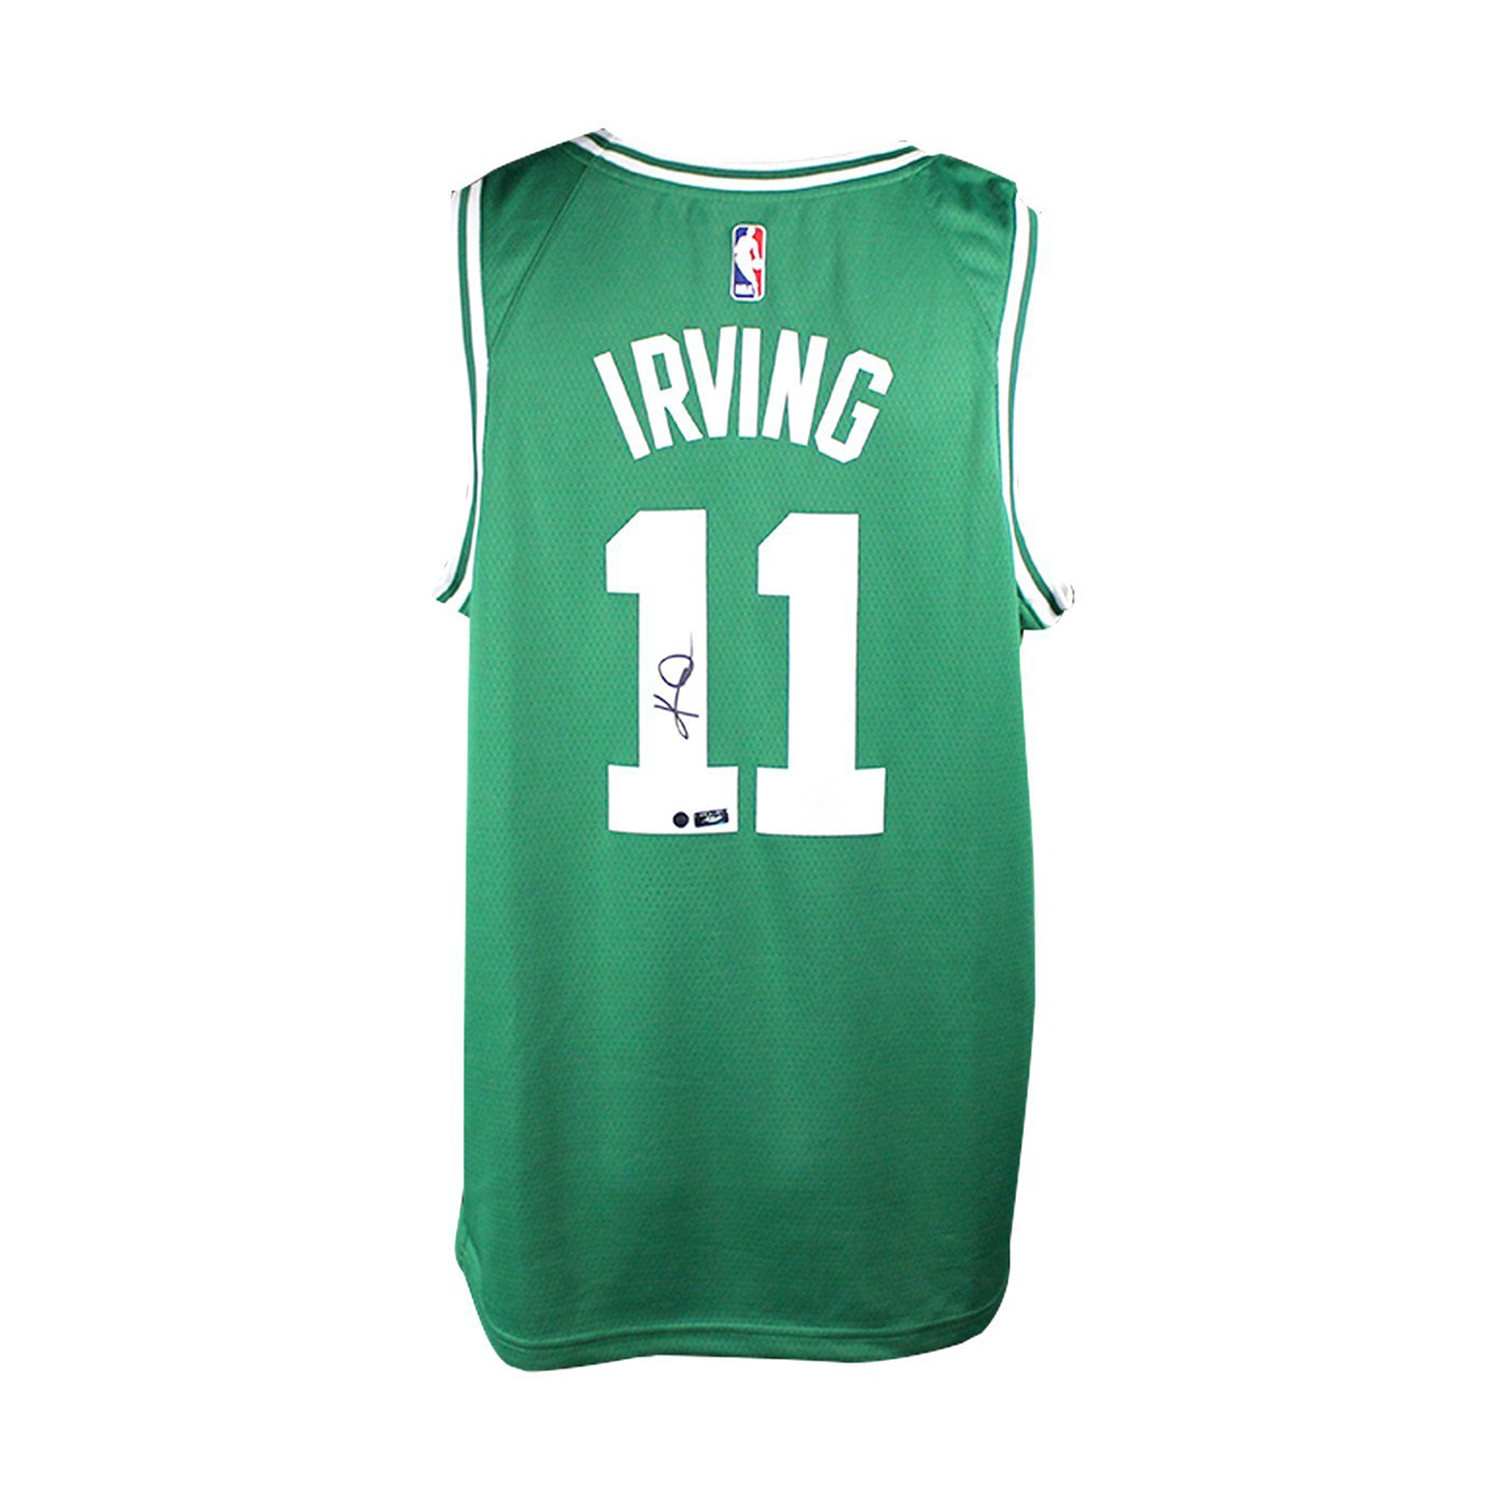 kyrie signed jersey